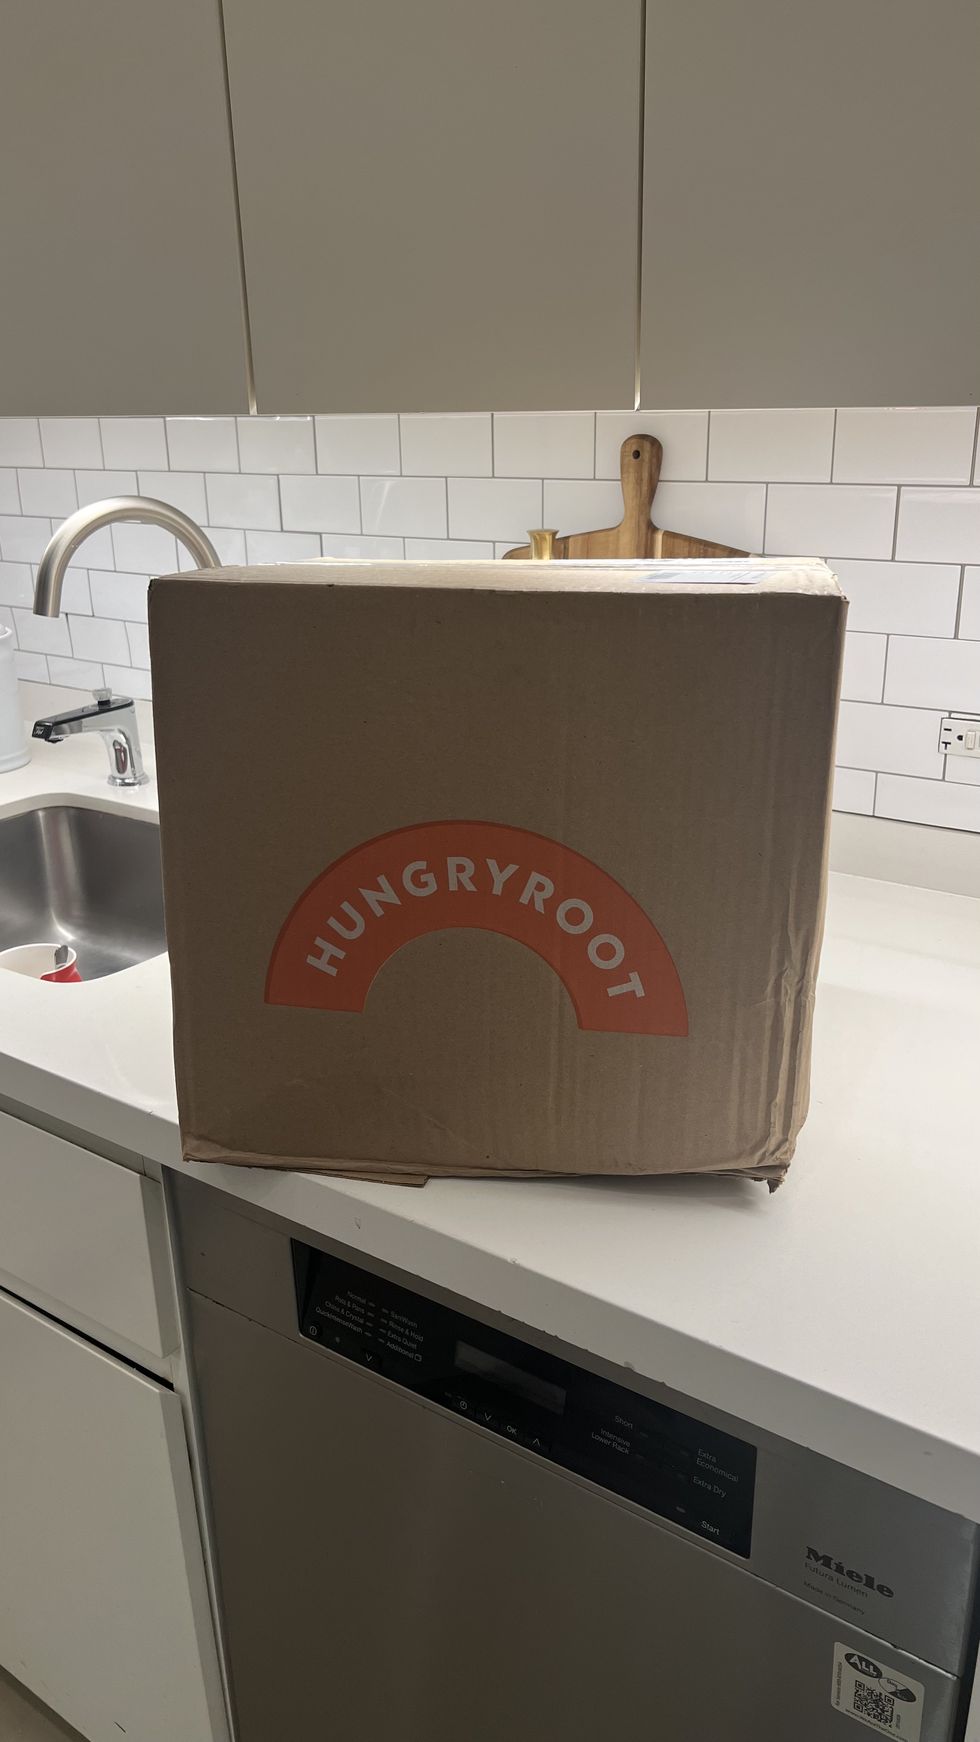 sassos testing hungryroot meal delivery service for good housekeeping